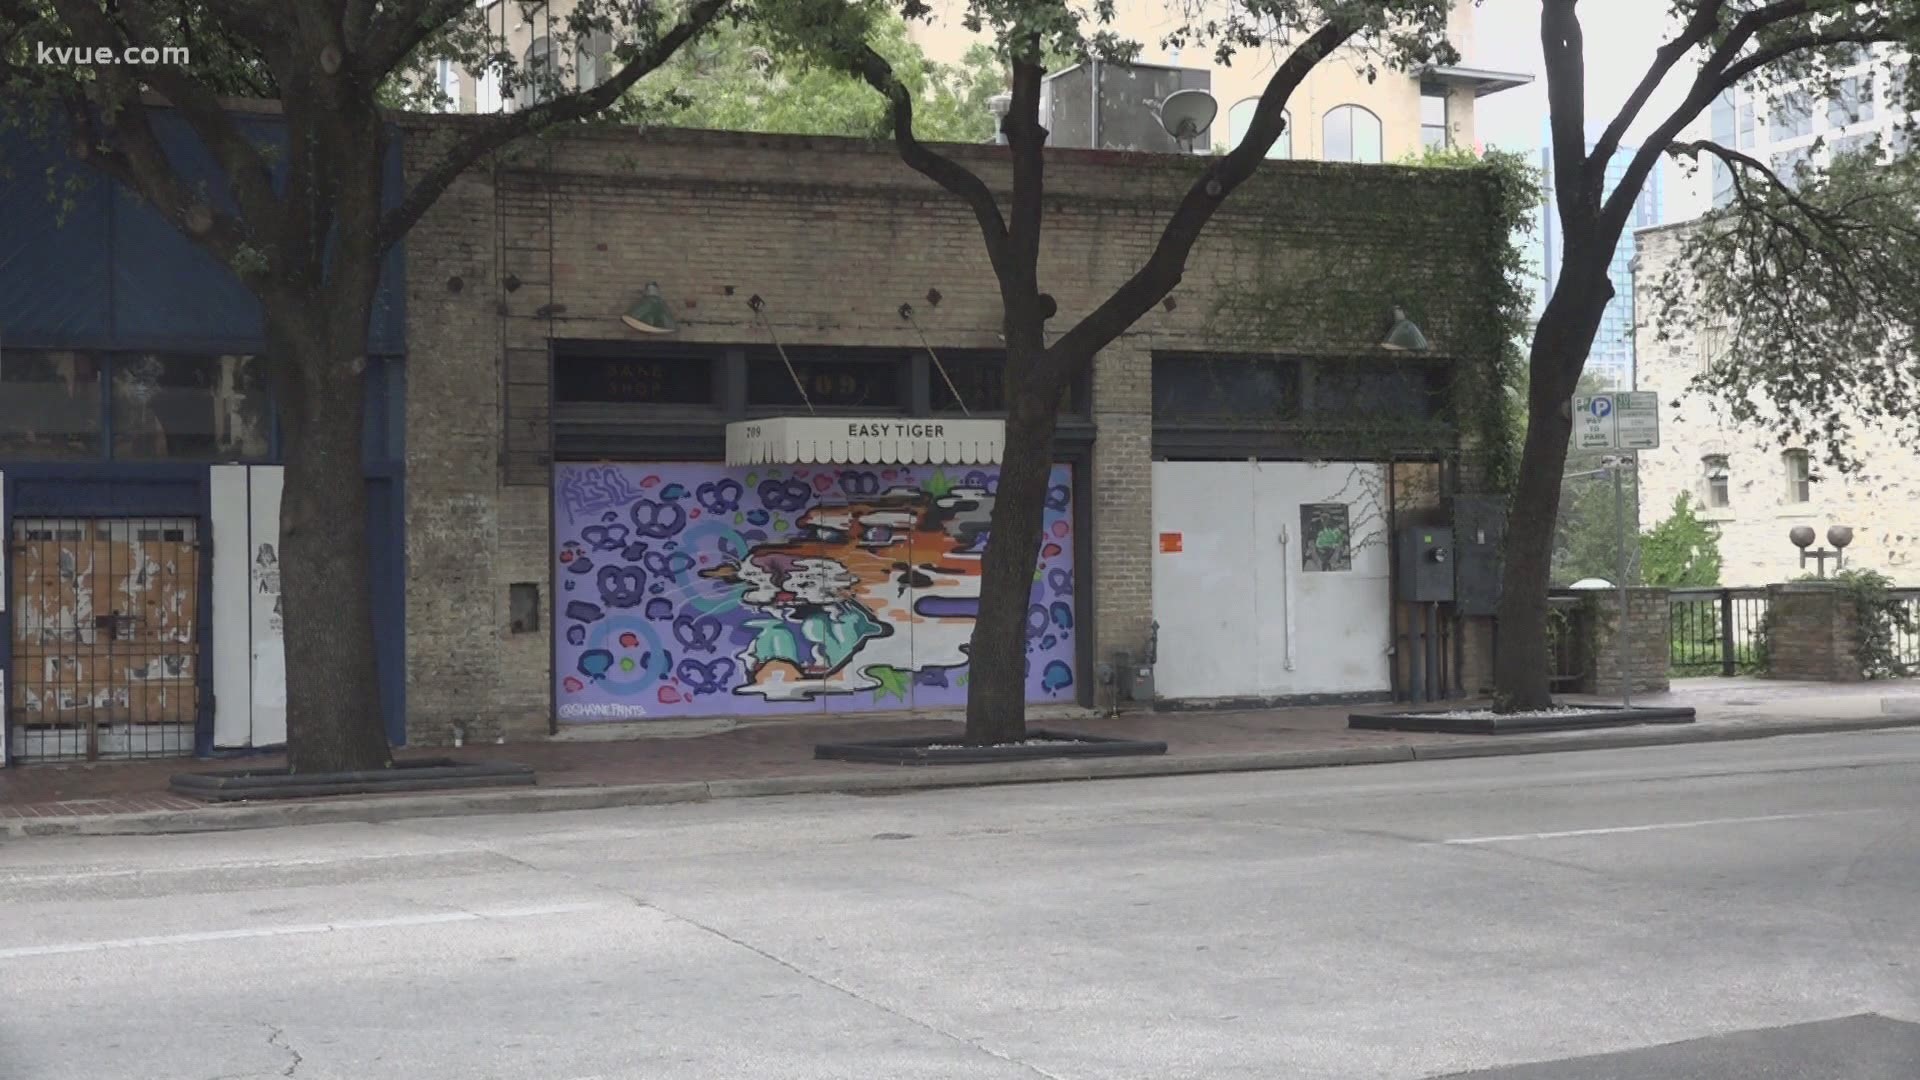 Downtown Austin businesses say they are closing because there is no more foot traffic